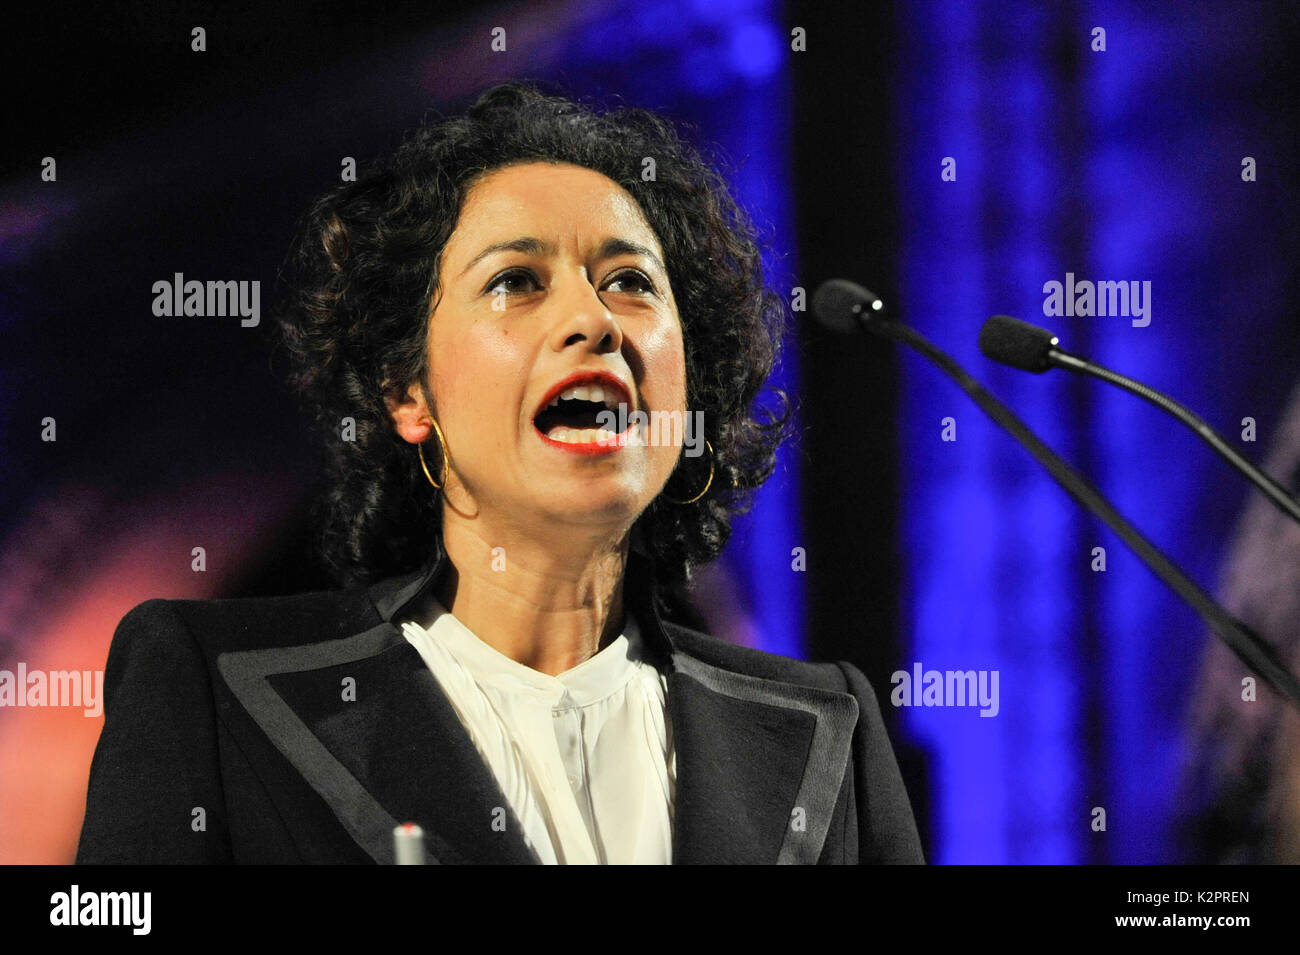 London, UK. 31 August 2017. Samira Ahmed, broadcaster and journalist ...